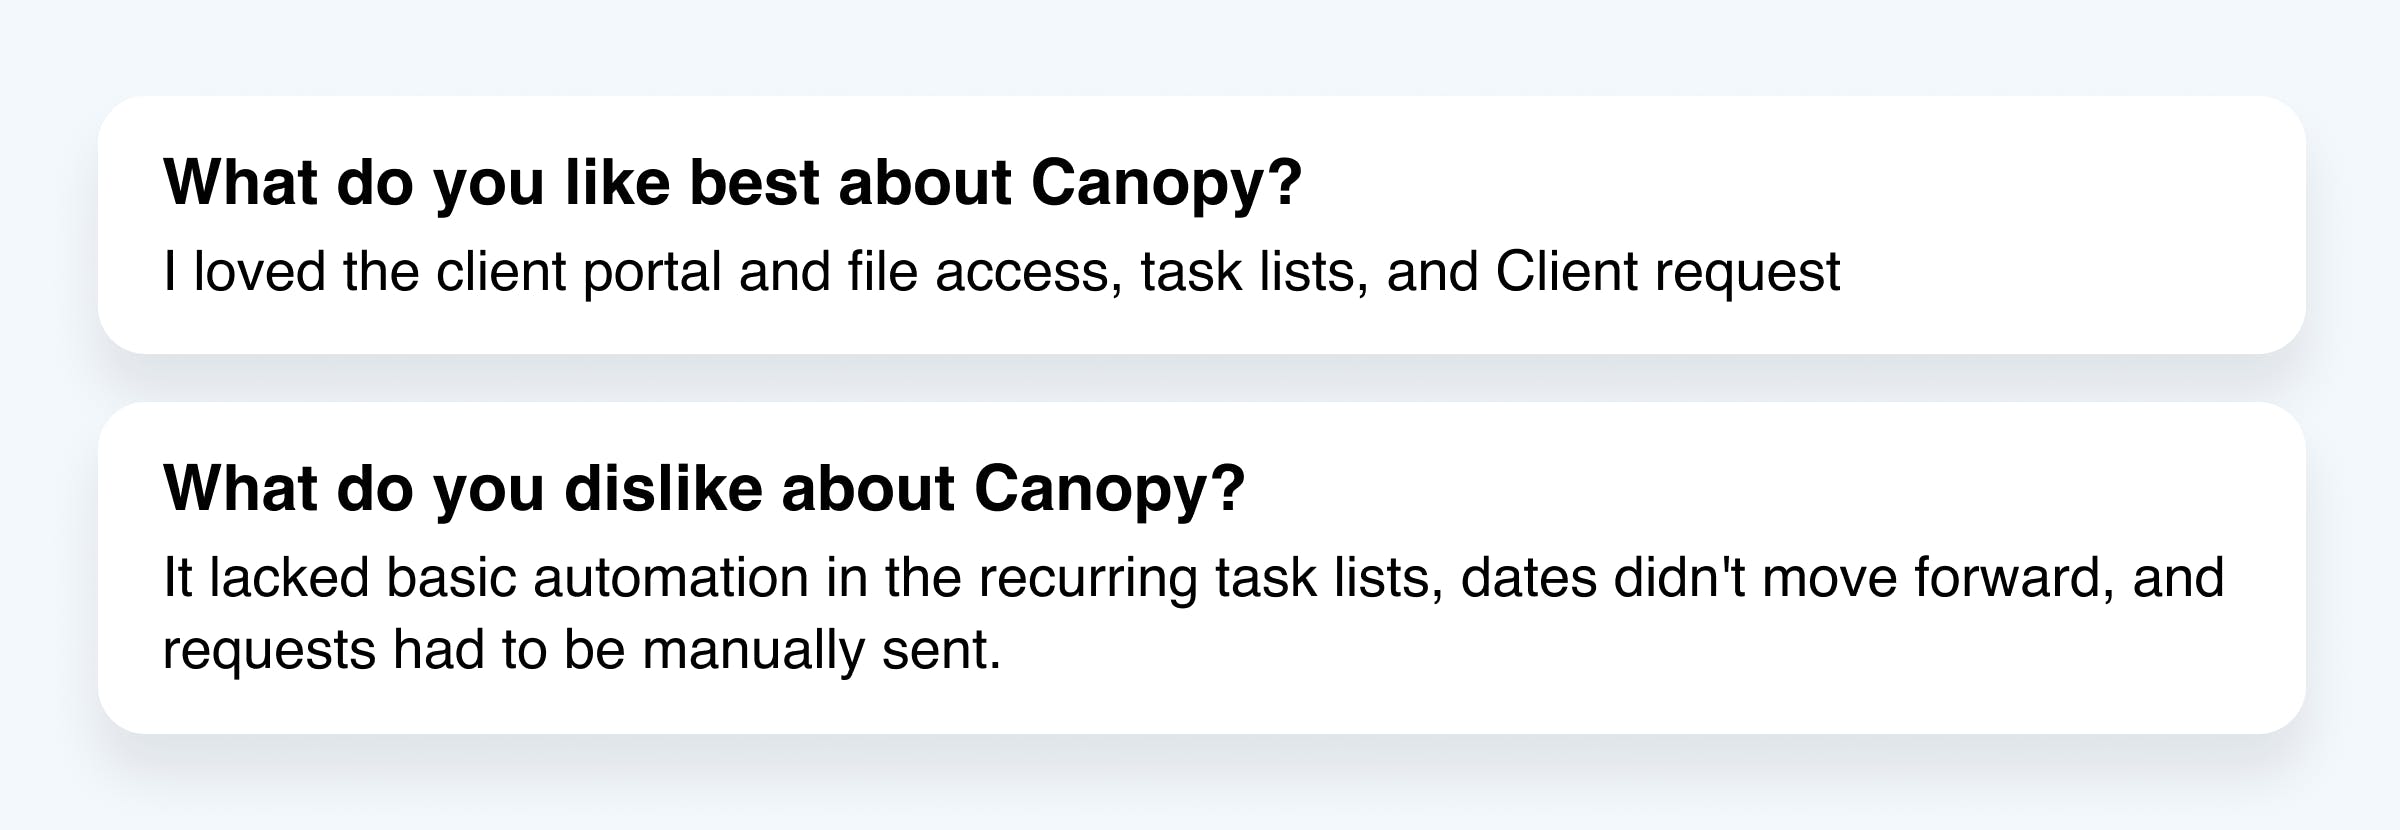 Screenshot of a user review listing things they like and dislike about Canopy.